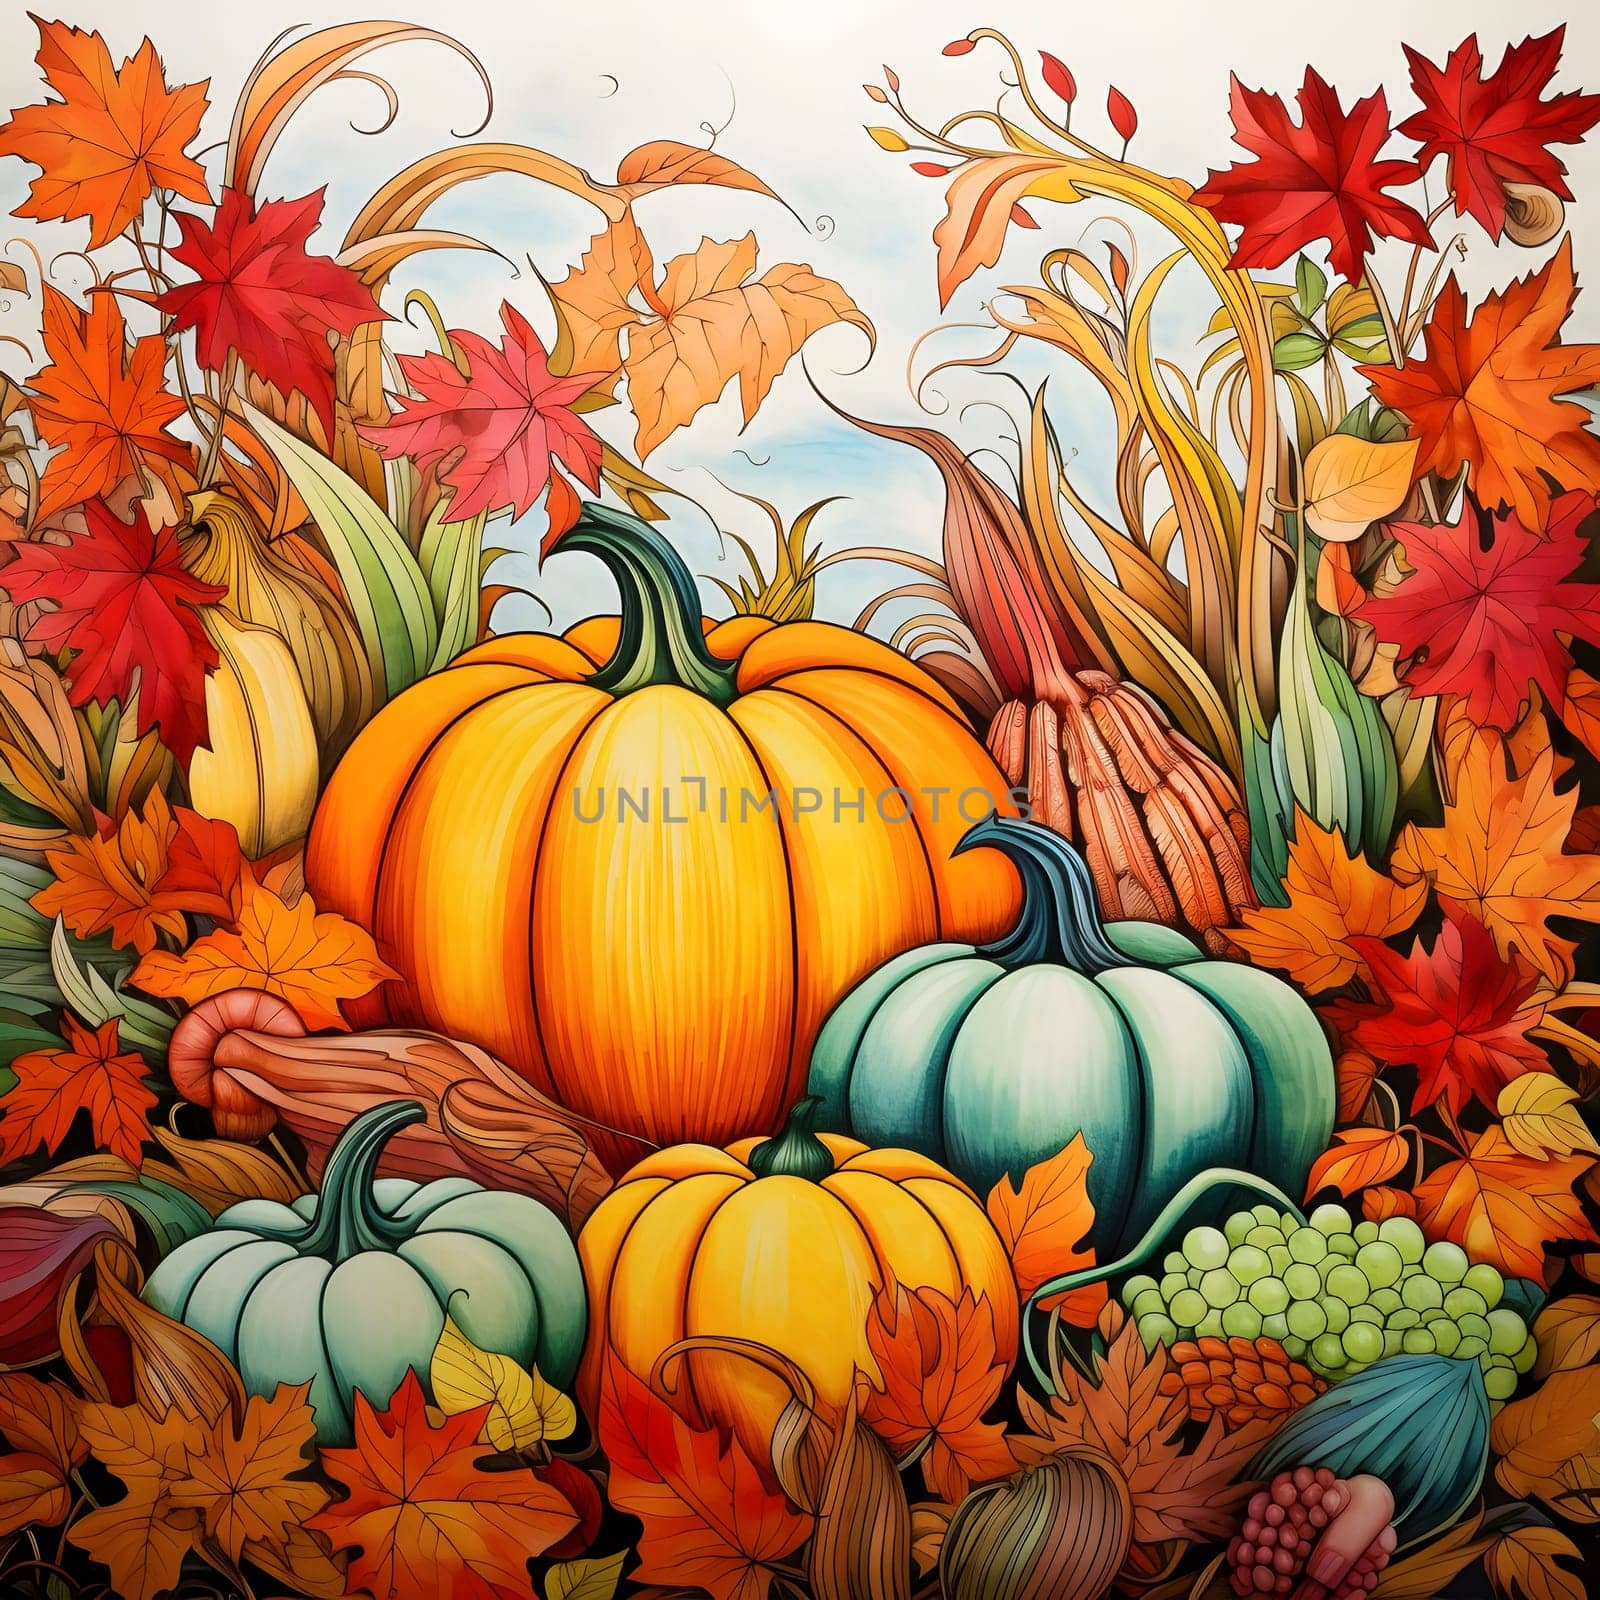 Illustration of pumpkins, leaves, harvest from the field. Pumpkin as a dish of thanksgiving for the harvest. by ThemesS